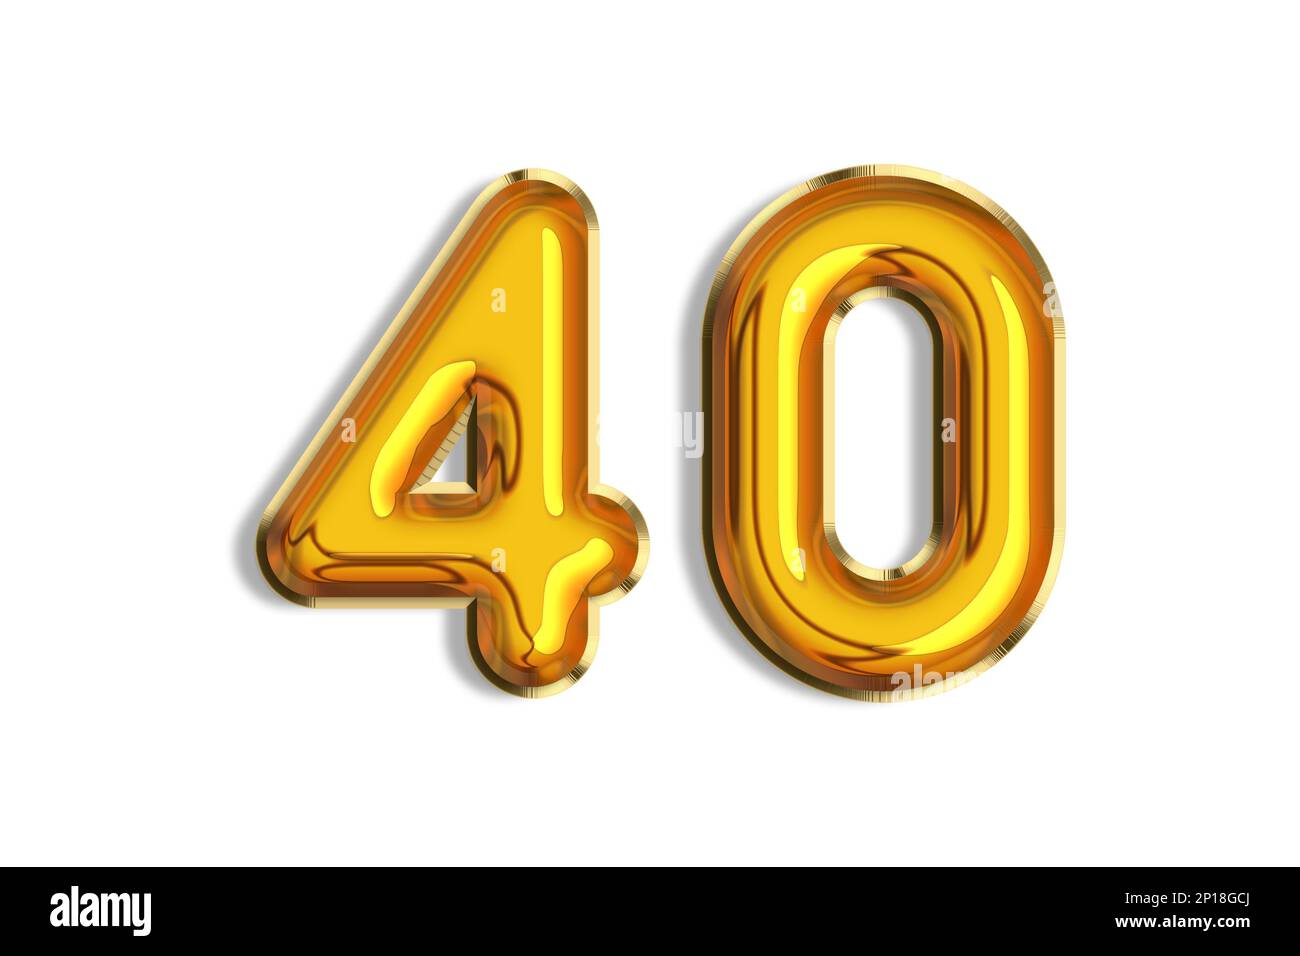 40 years old. Gold balloons, 40th anniversary number, happy birthday congratulations. Illustration of golden realistic 3d symbols. Banner, icons isola Stock Photo